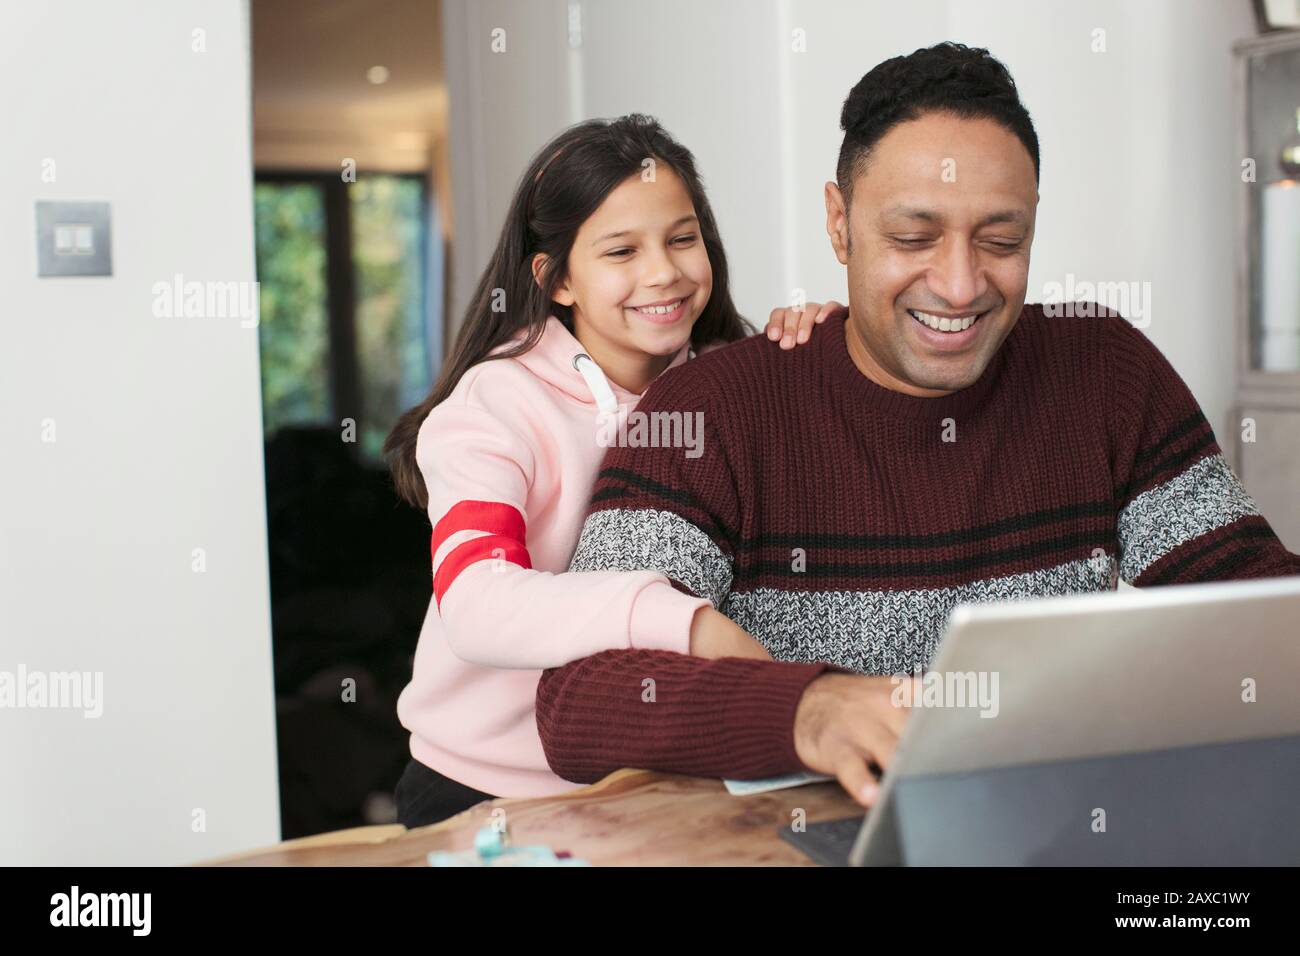 Smiling father and daughter using digital tablet at table Stock Photo